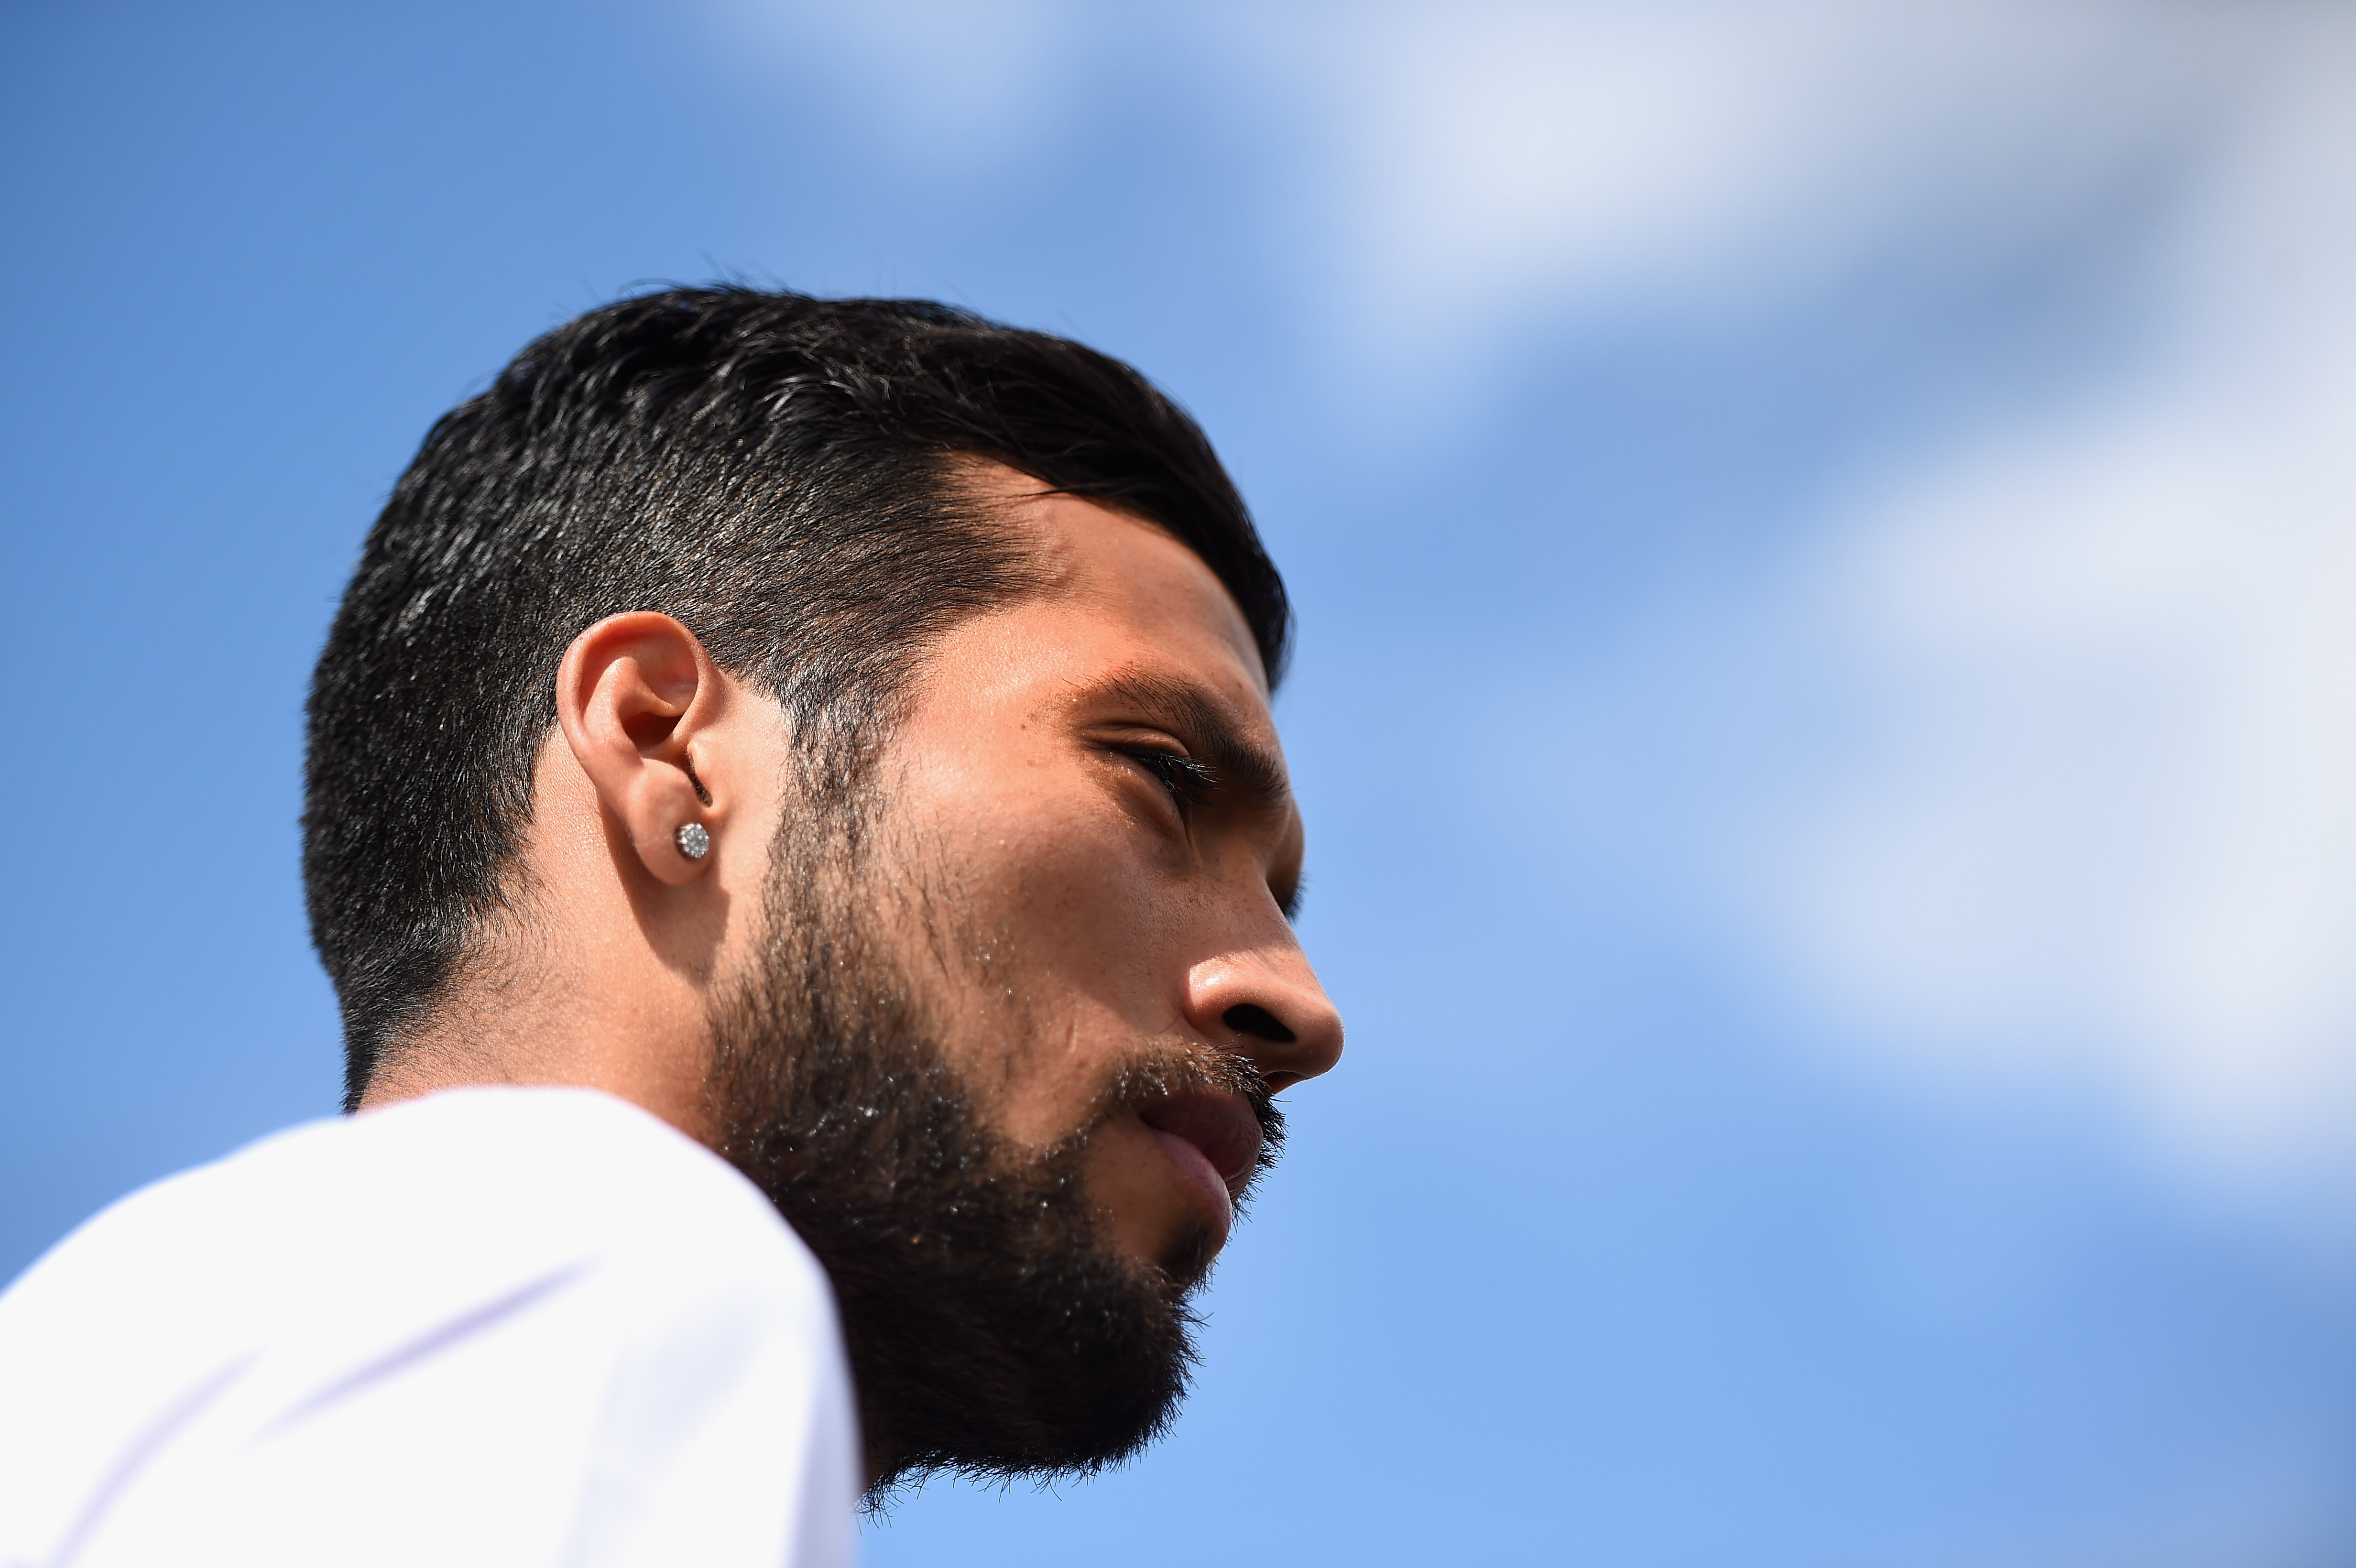 SAINT PETERSBURG, RUSSIA - JULY 20:  Ezequiel Garay of FC Zenit Saint Petersburg speaks to the media during a press conference at the Zenit Training Centre during a media tour of Russia 2018 FIFA World Cup venues on July 20, 2015 in Saint Petersburg, Russia.  (Photo by Laurence Griffiths/Getty Images)